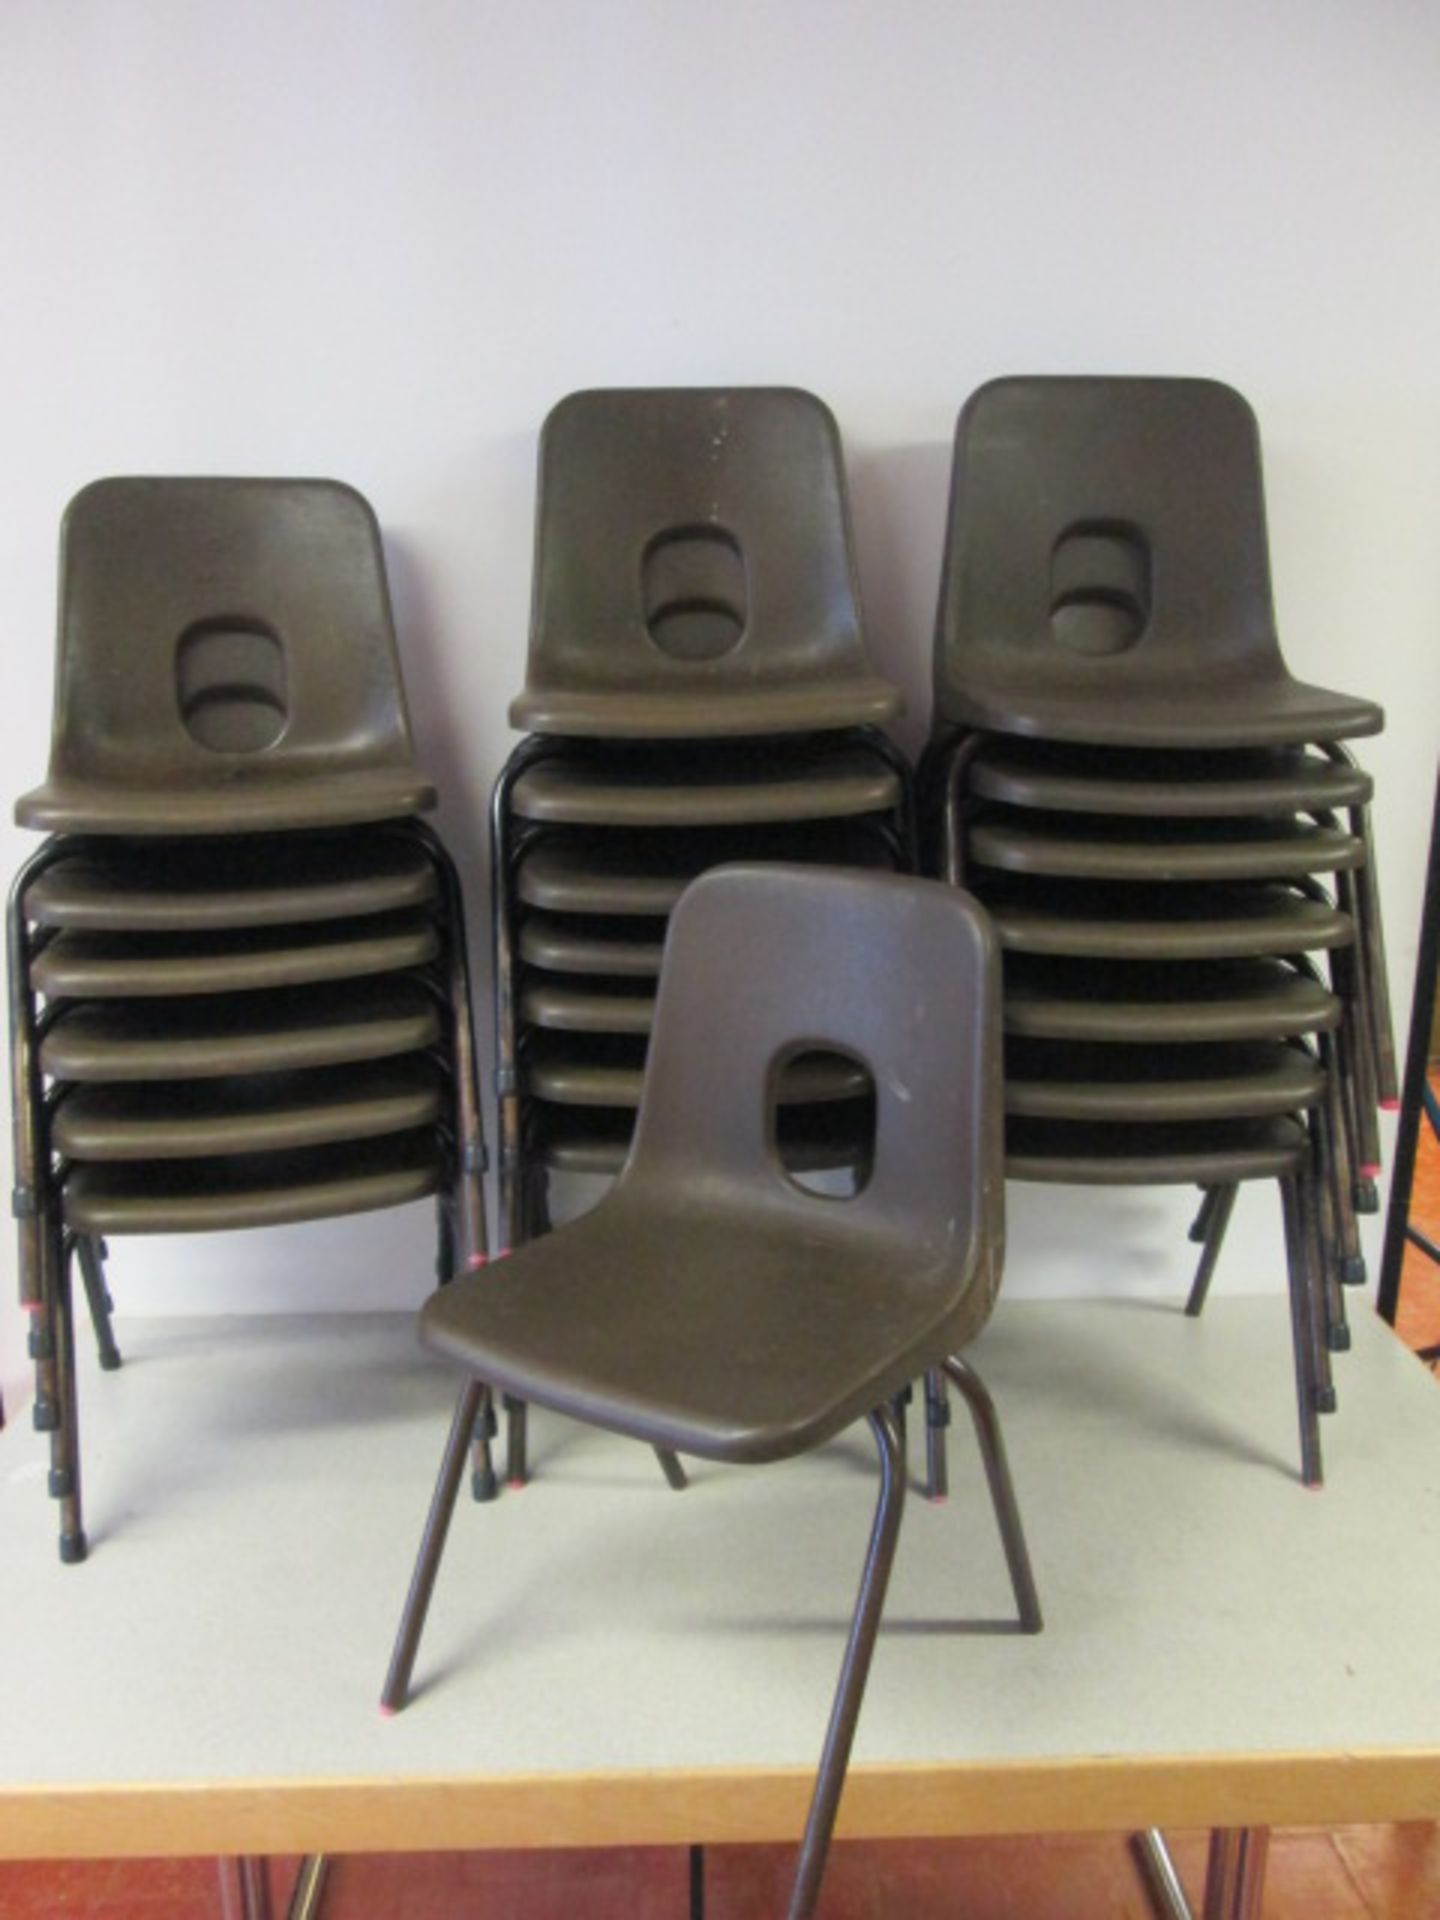 21 x Hille Series E Overall, Children's Classroom Stacking Chairs in Brown. Size (H) 60cm x (W) 40cm